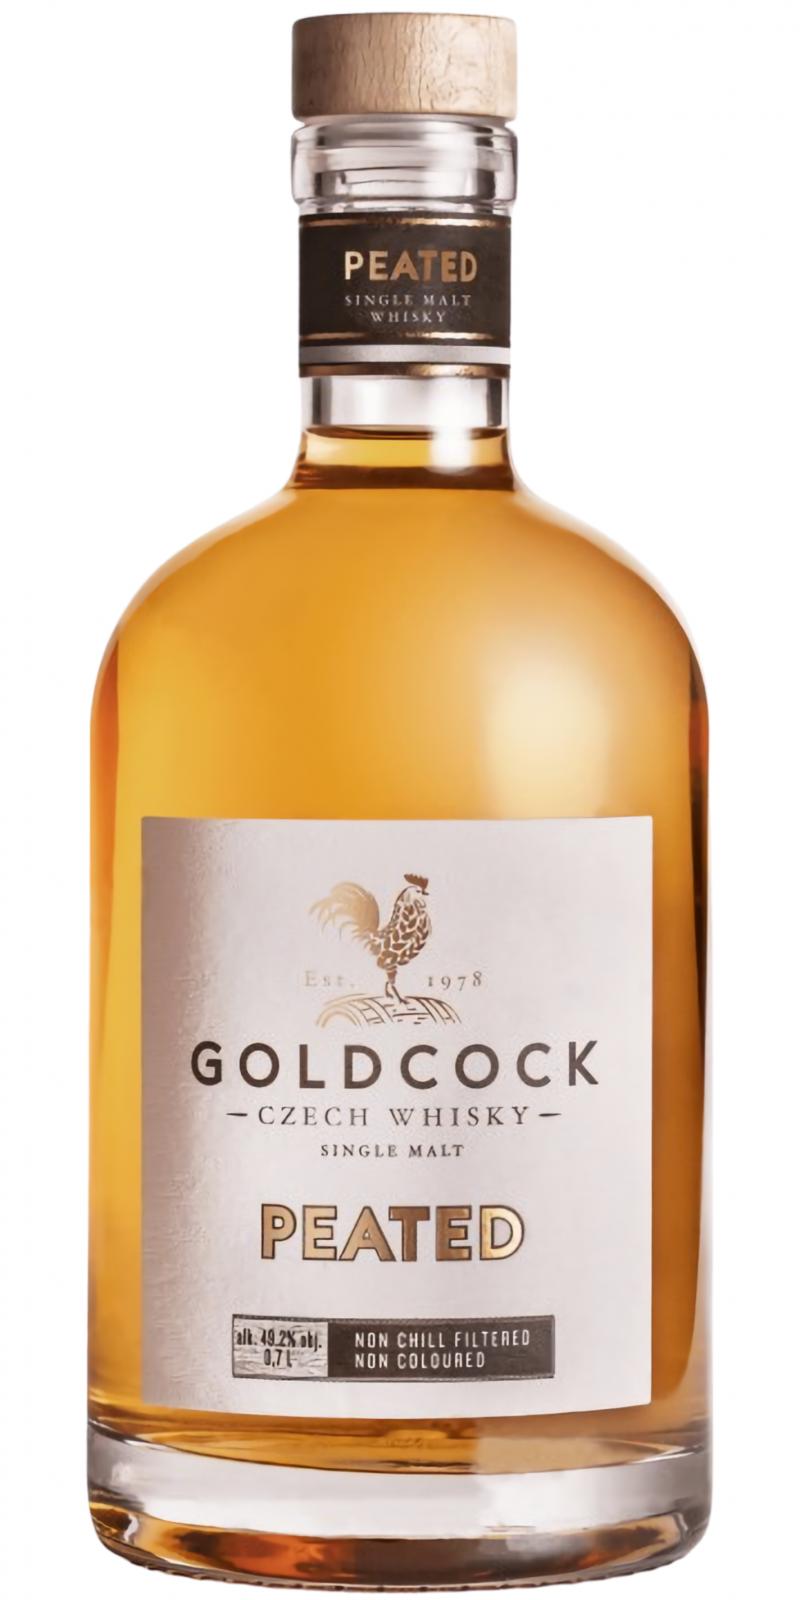 Gold Cock Peated